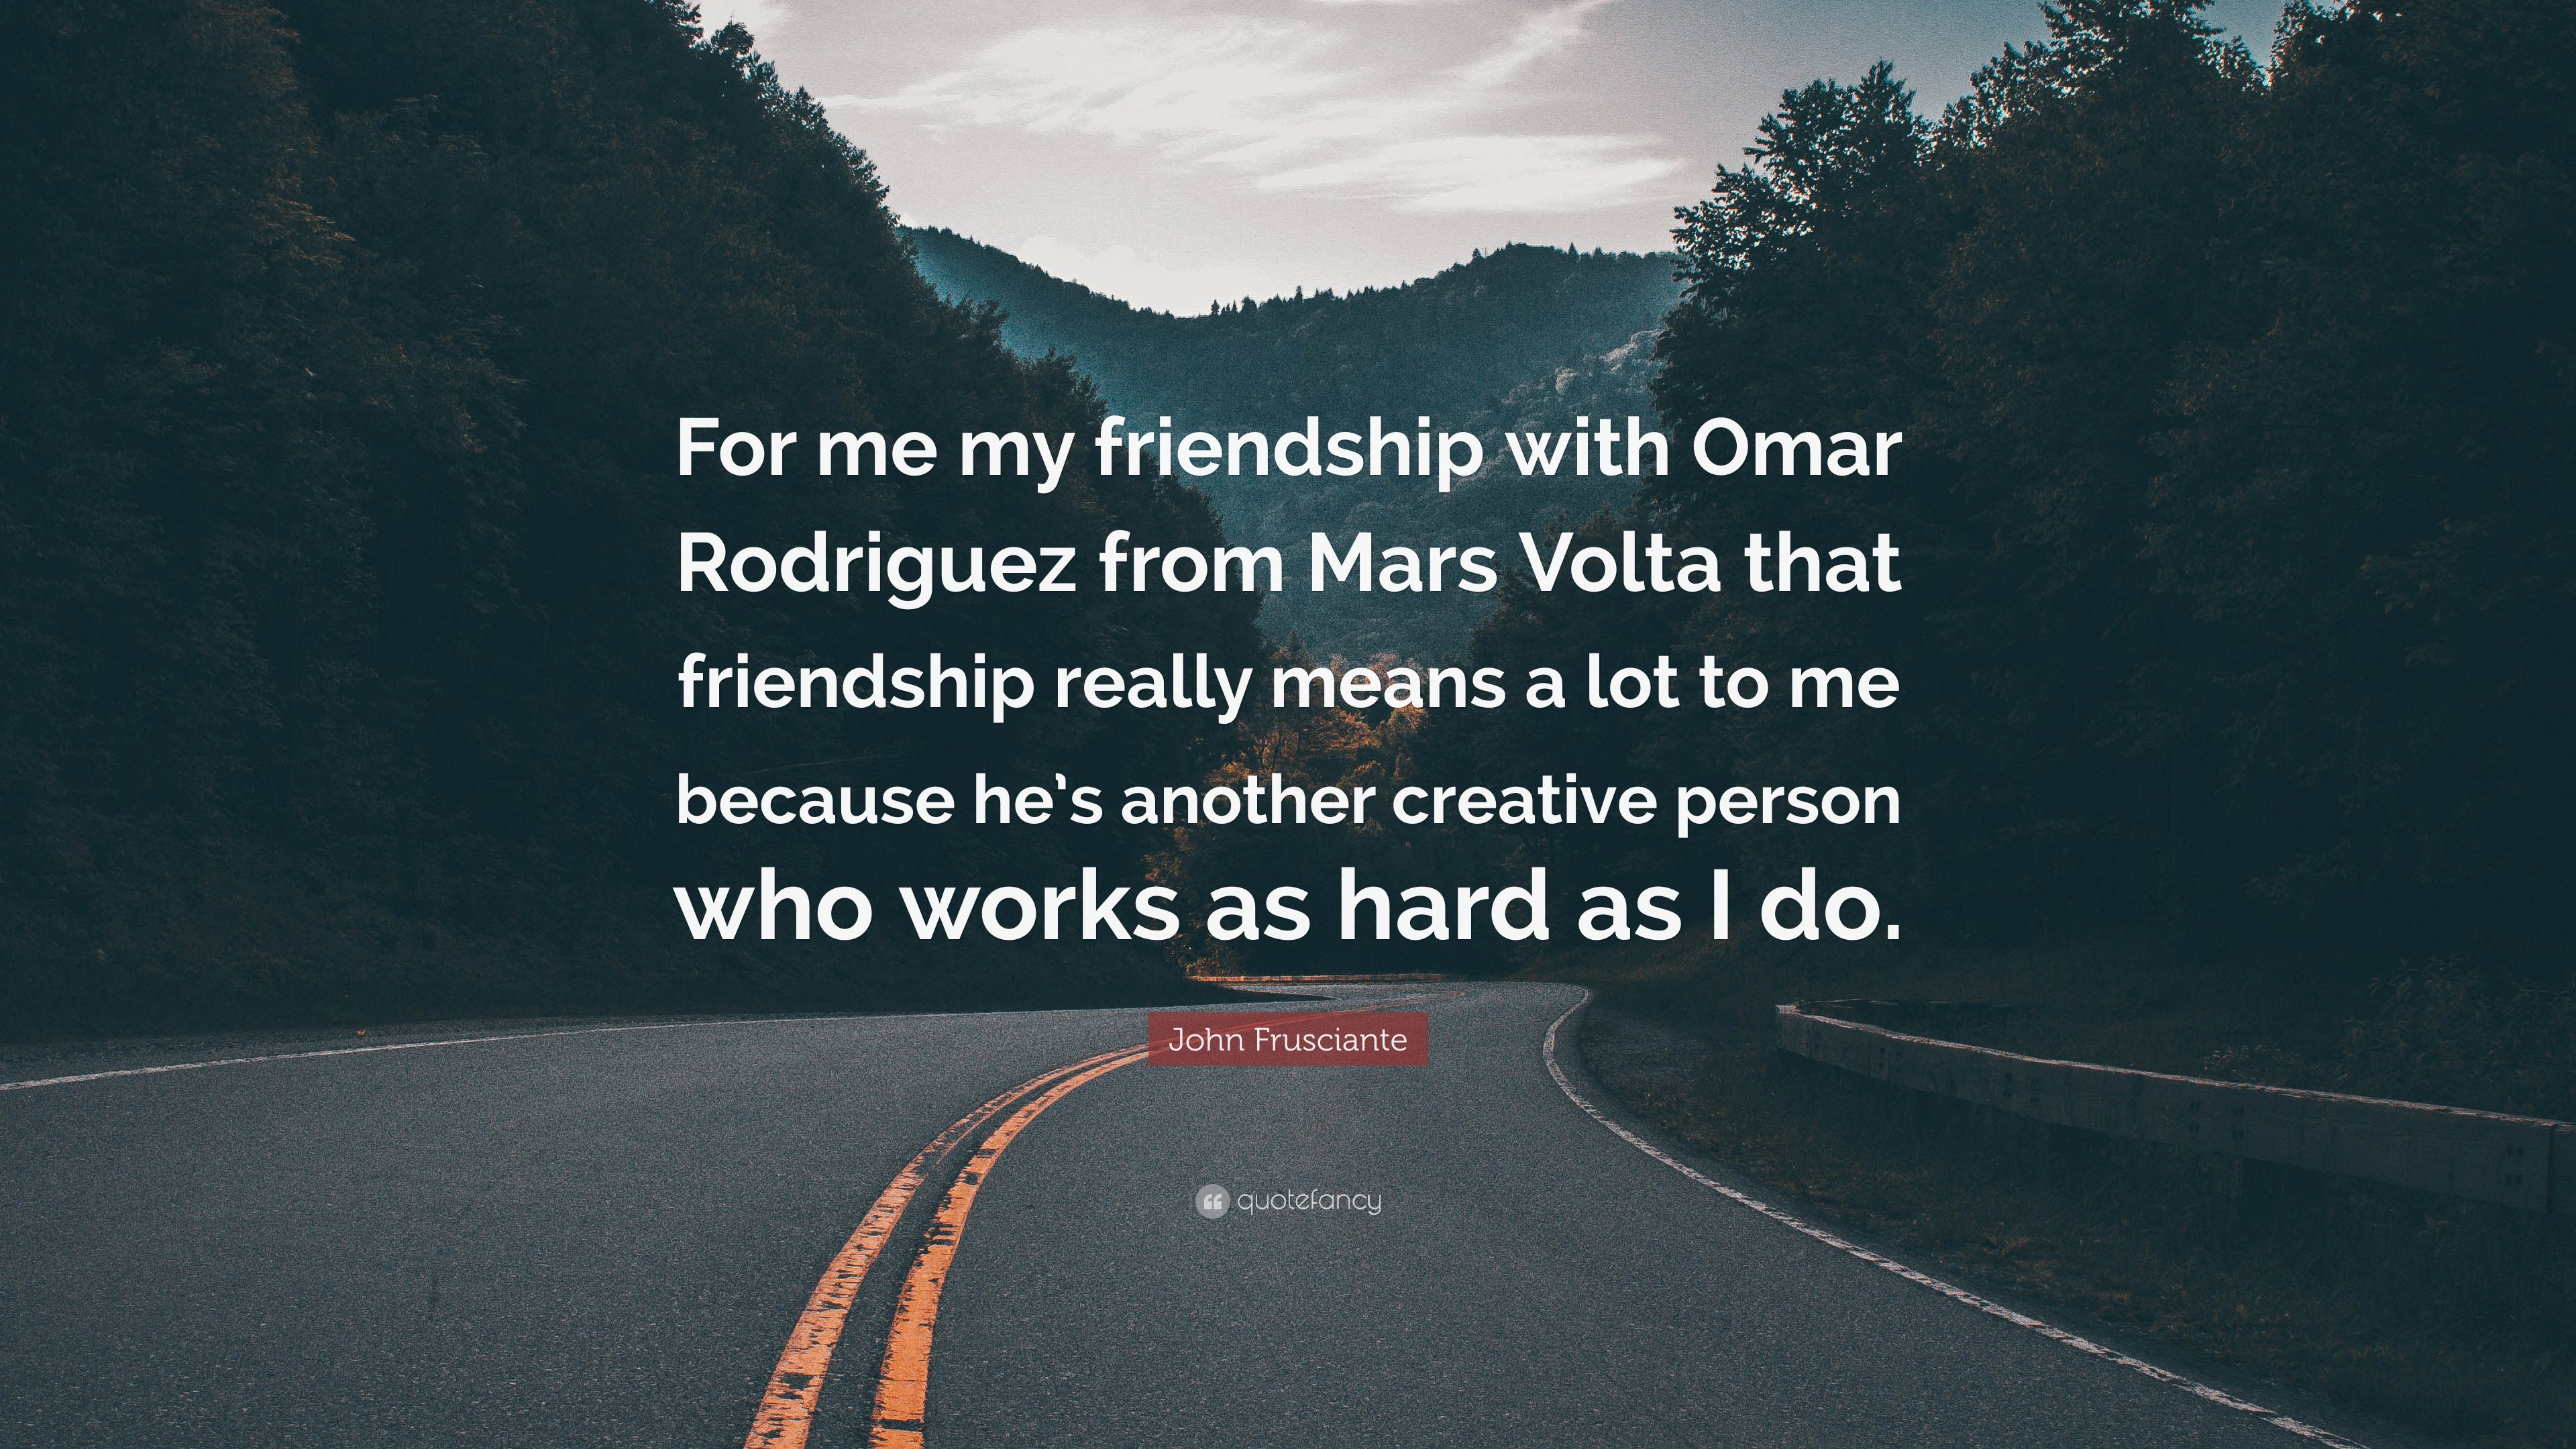 John frusciante quote âfor me my friendship with omar rodriguez from mars volta that friendship really means a lot to me because hes another câ